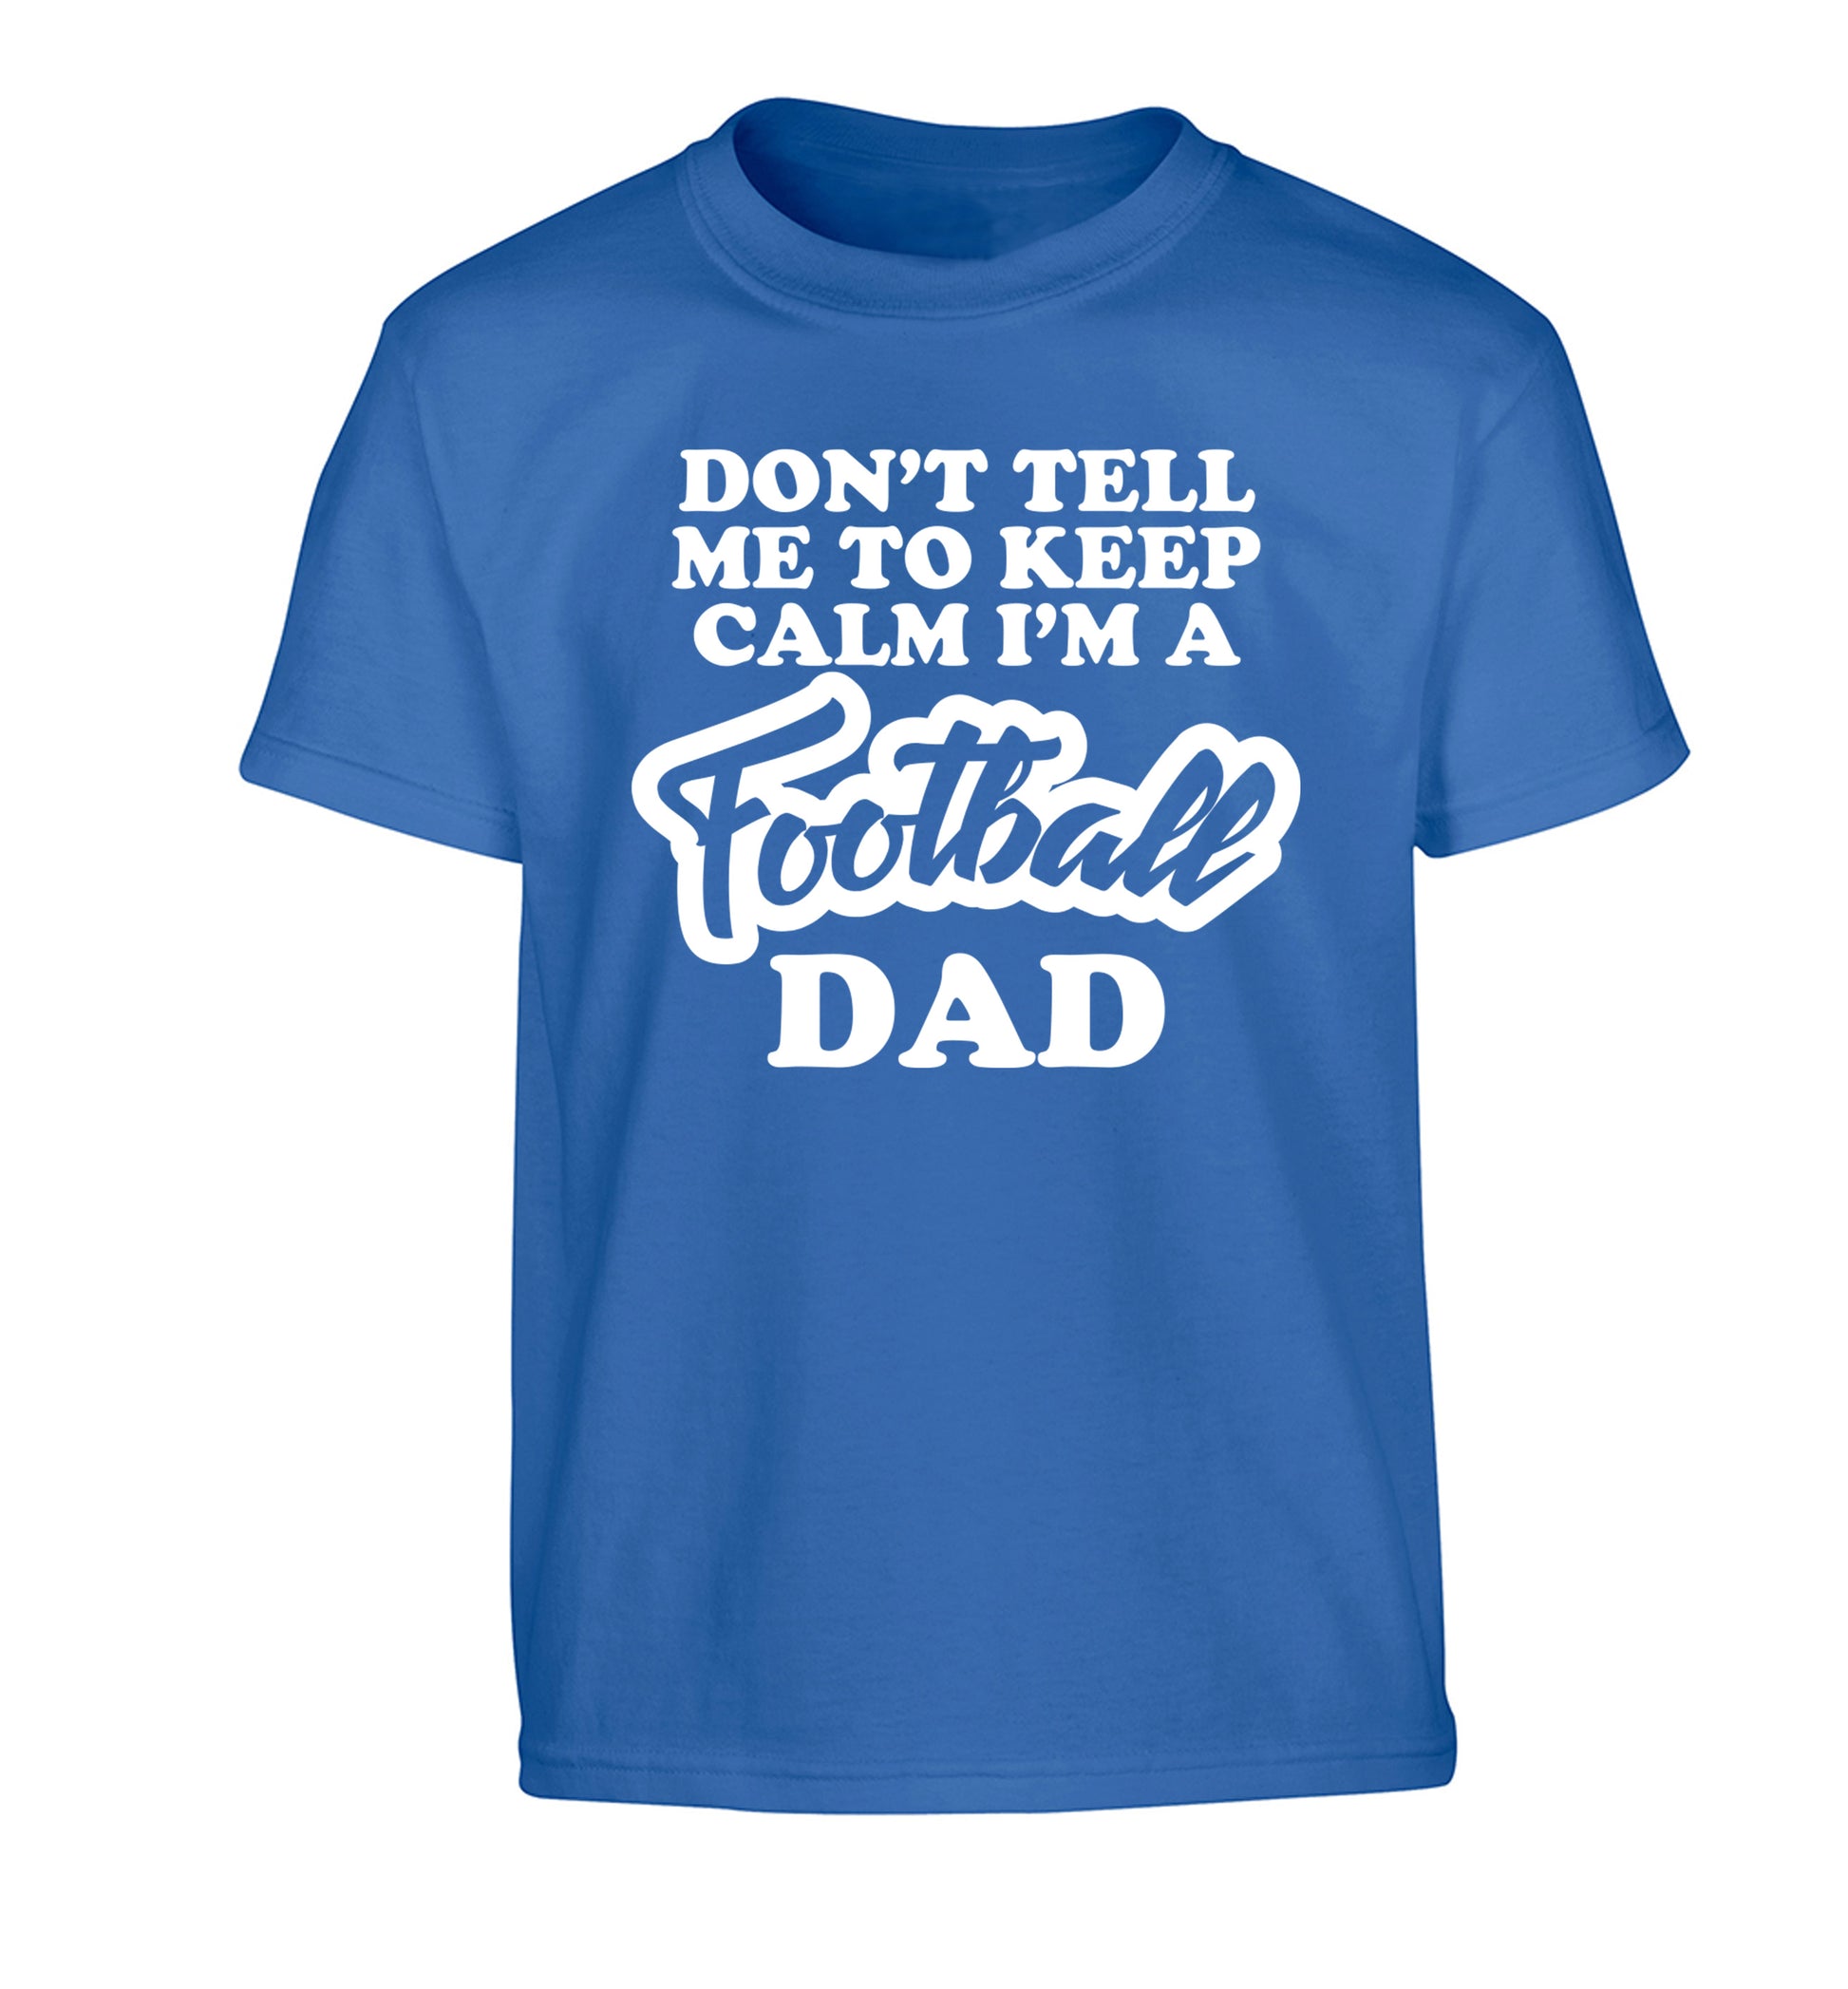 Don't tell me to keep calm I'm a football dad Children's blue Tshirt 12-14 Years